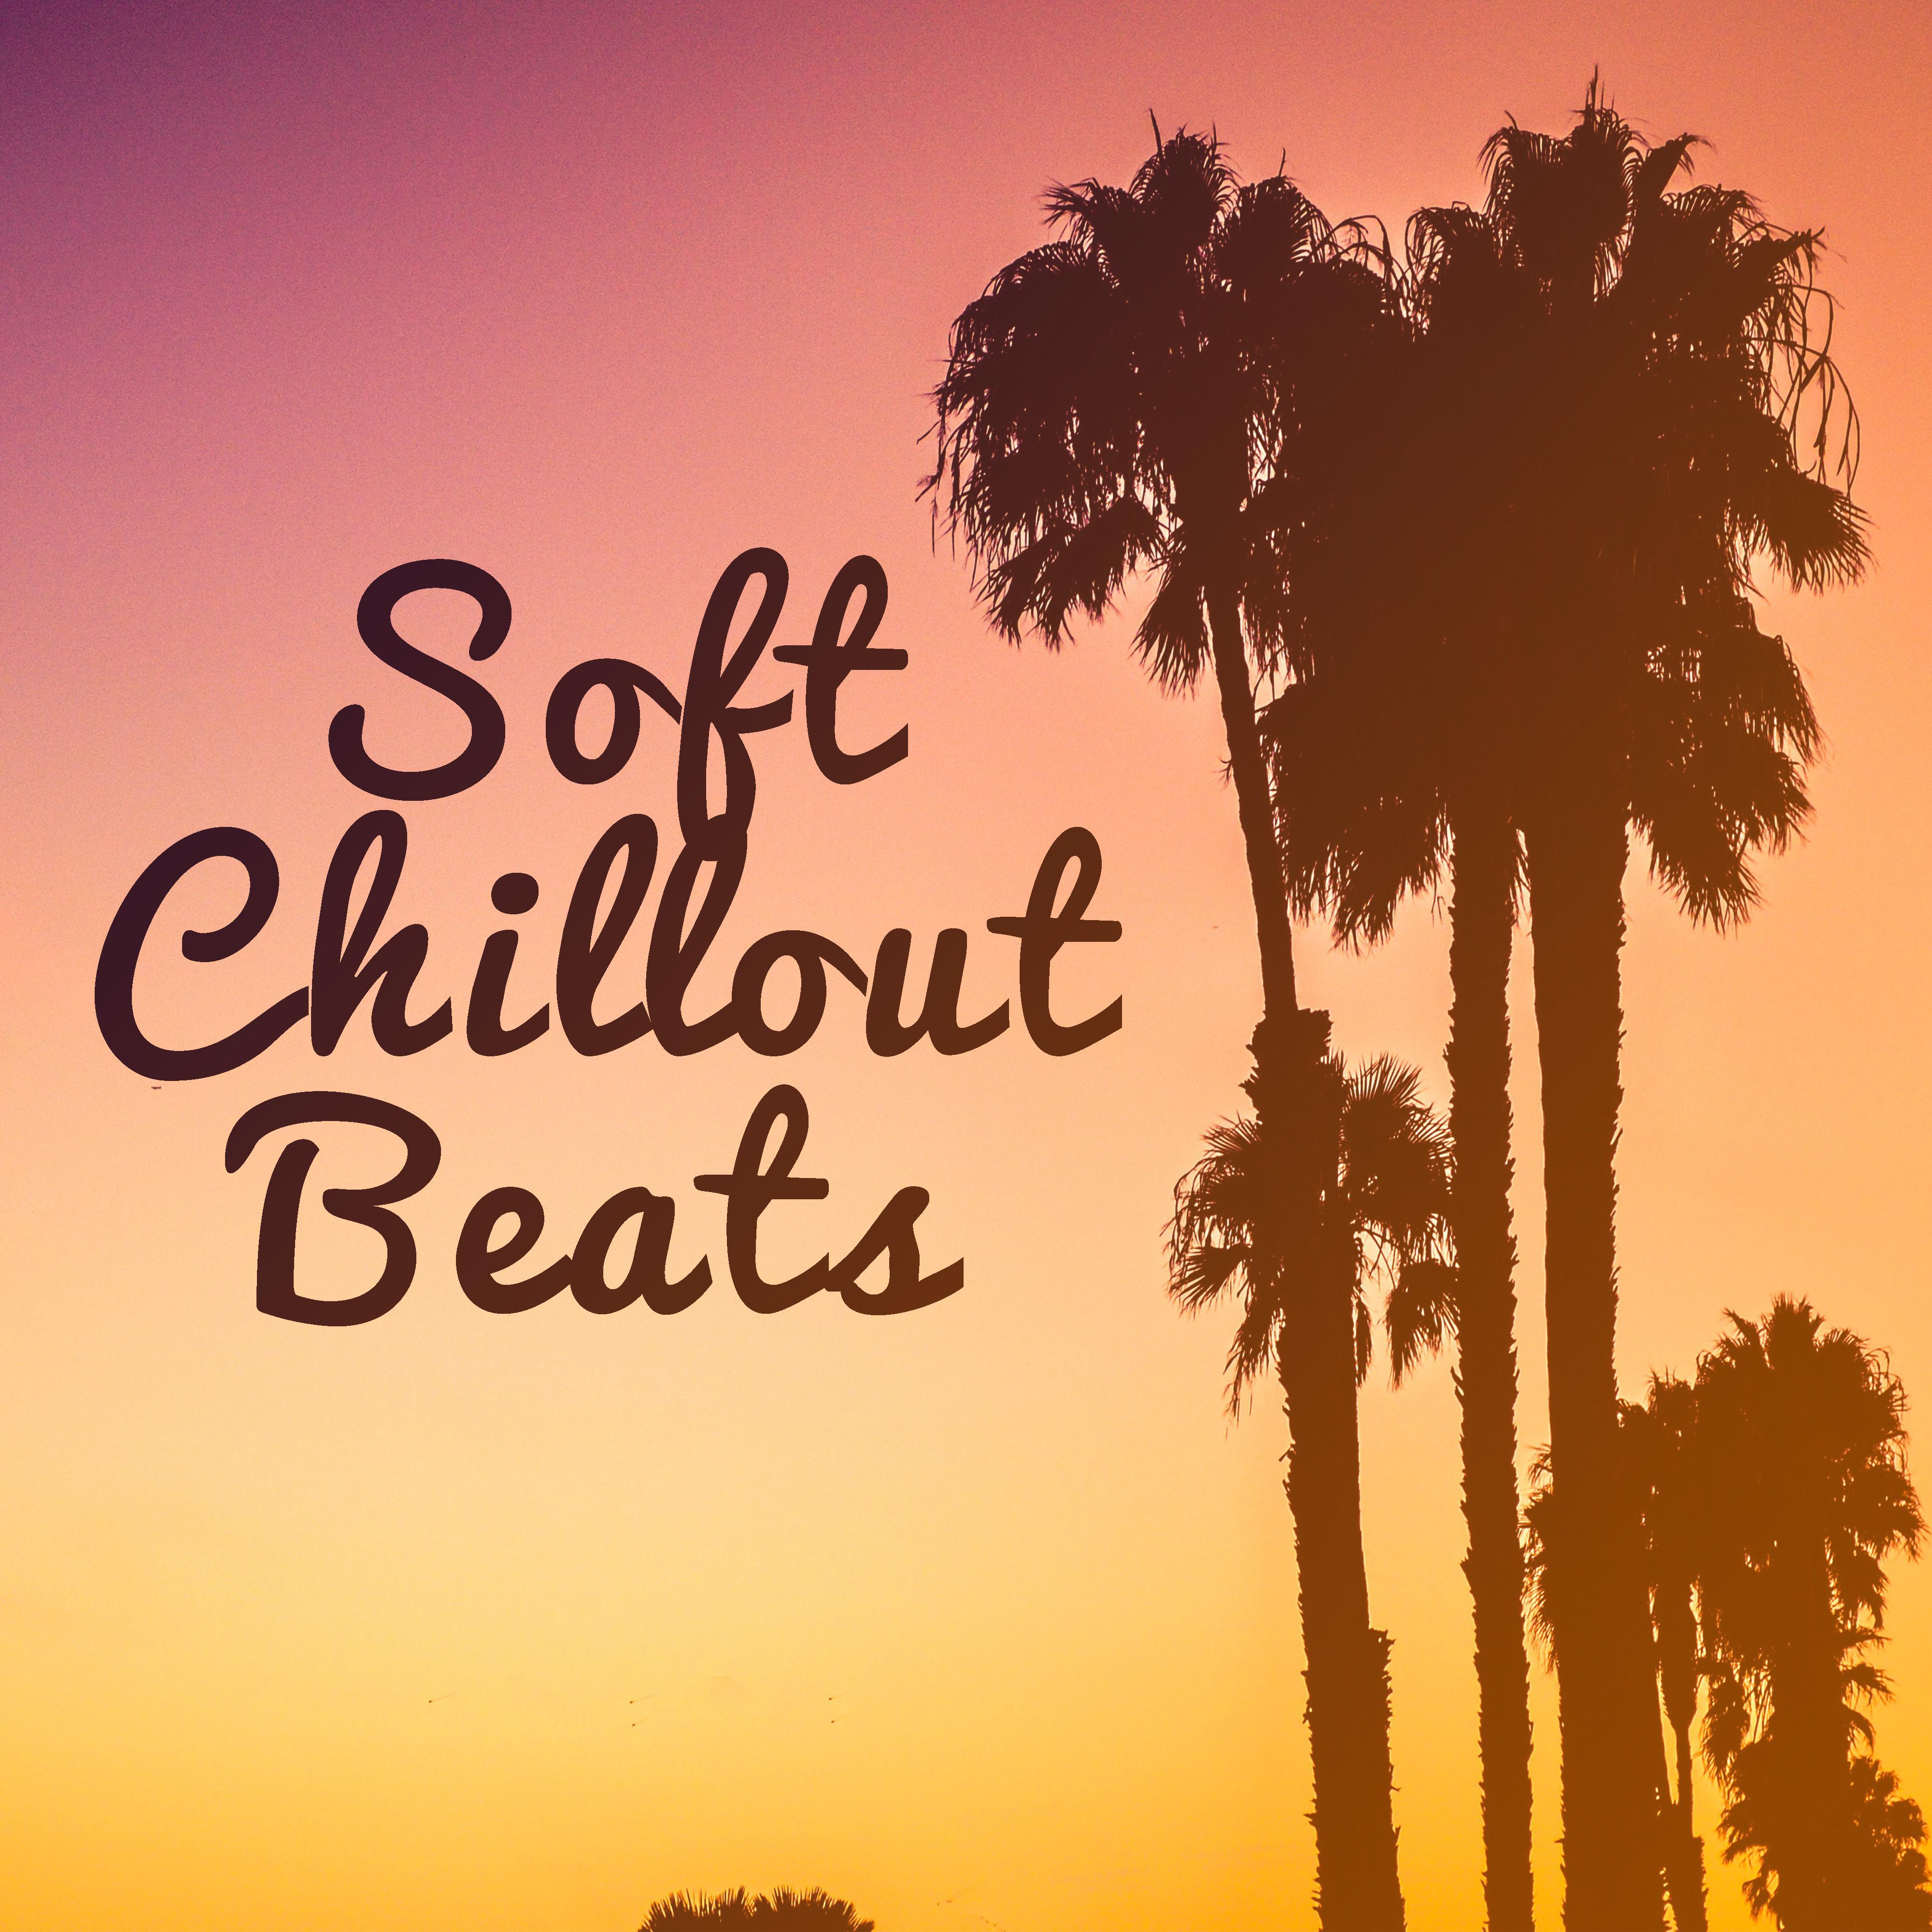 Soft Chillout Beats – Peaceful Chill Out Beats, Stress Relief, Beach Lounge Music, Summer Rest